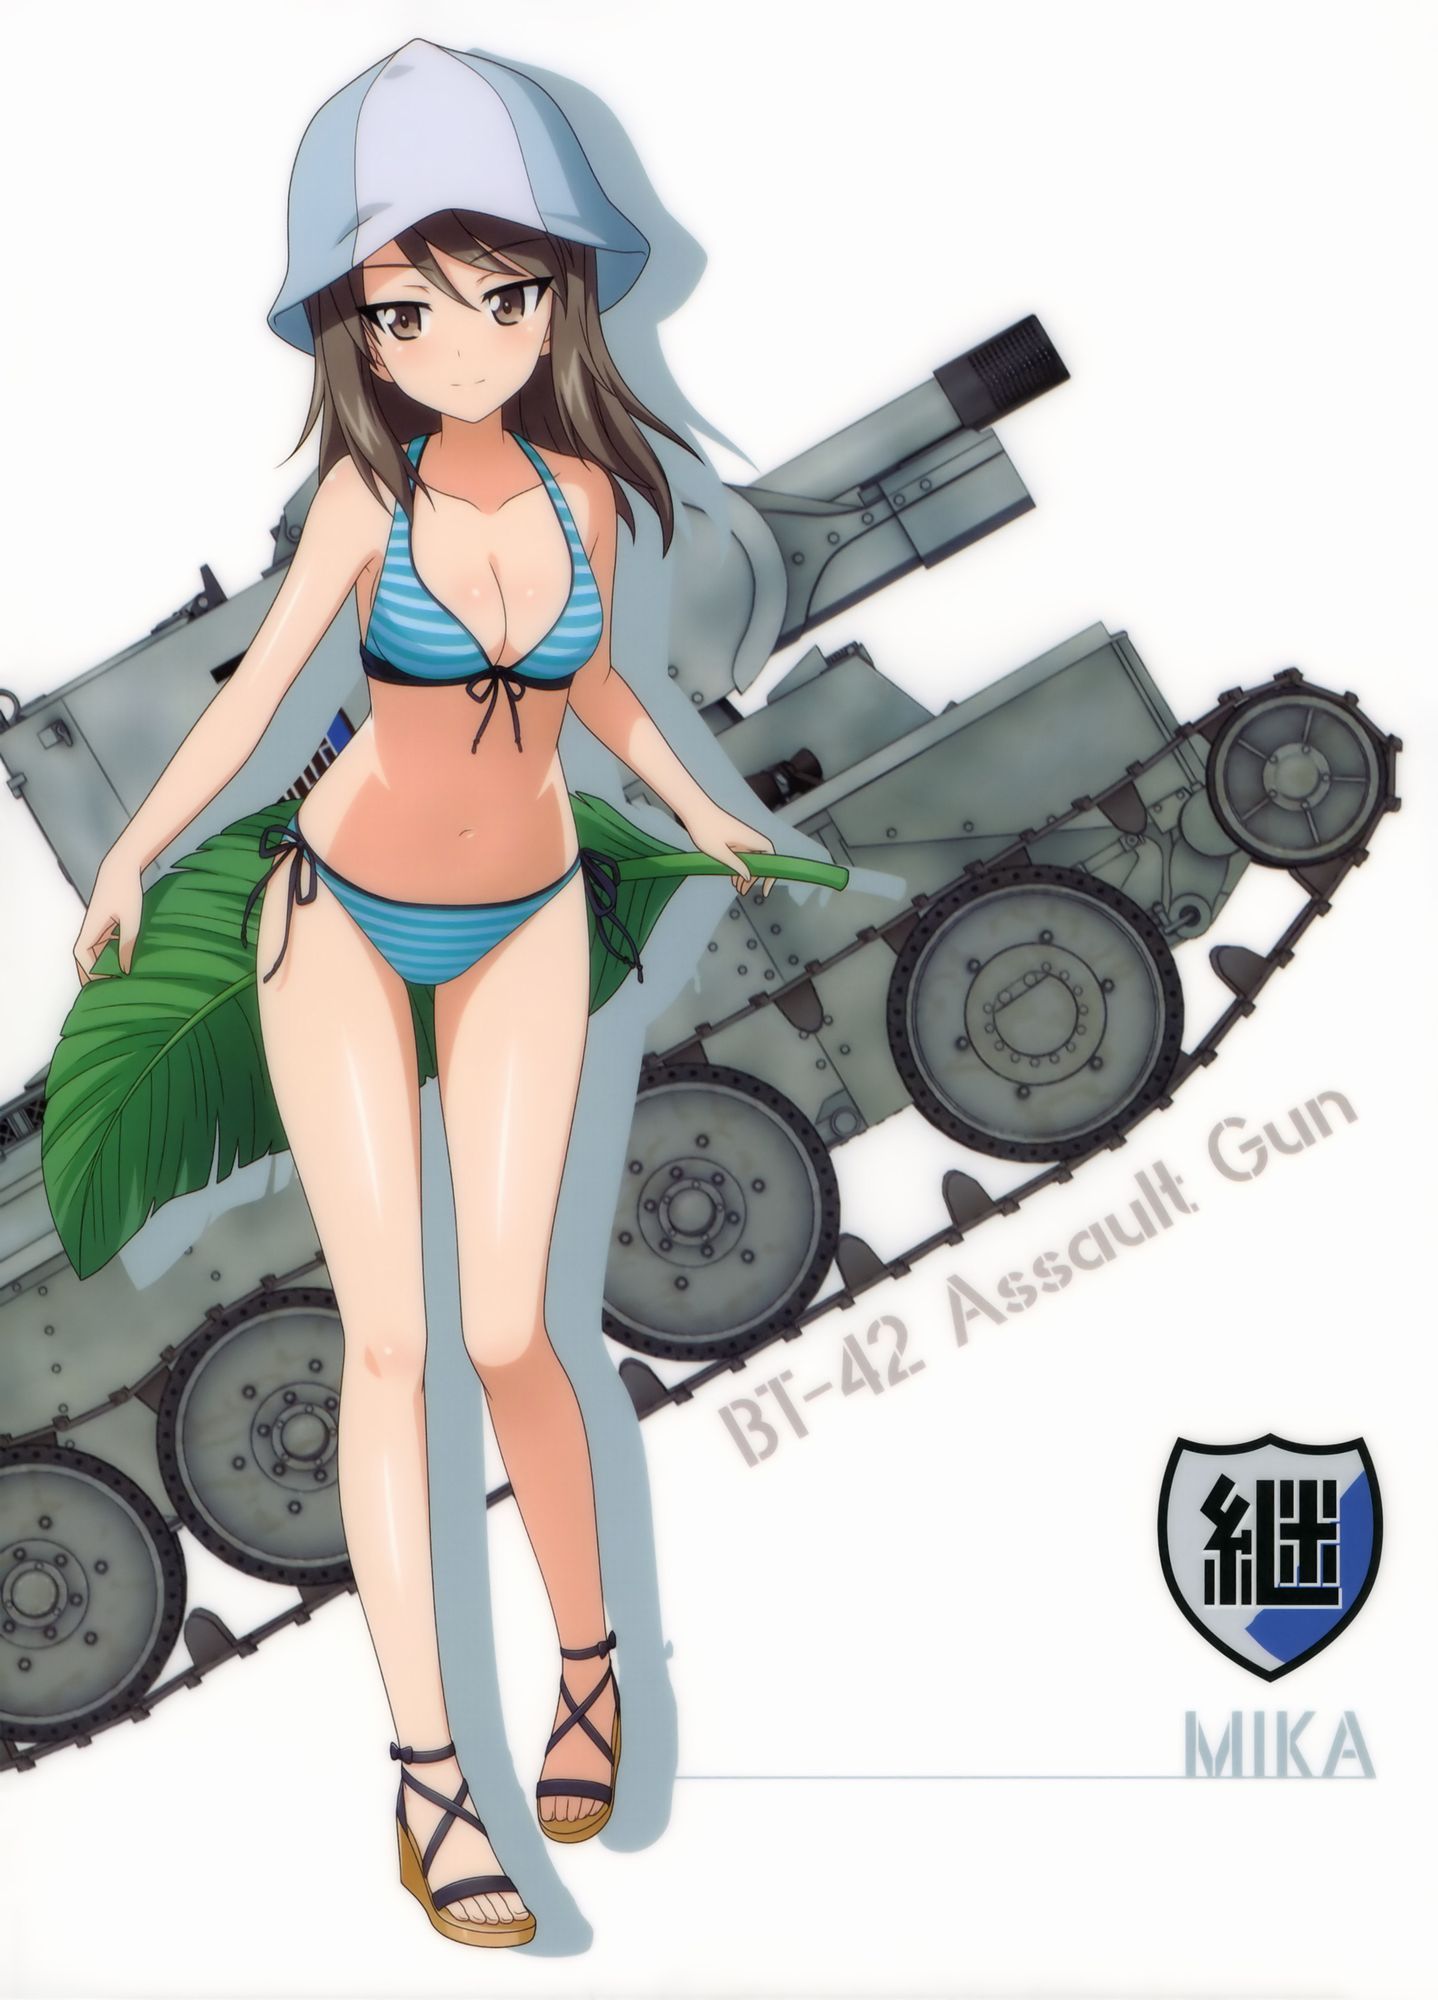 【Erotic Image】Mika's character image that you want to refer to the erotic cosplay of Girls &amp; Panzer 17